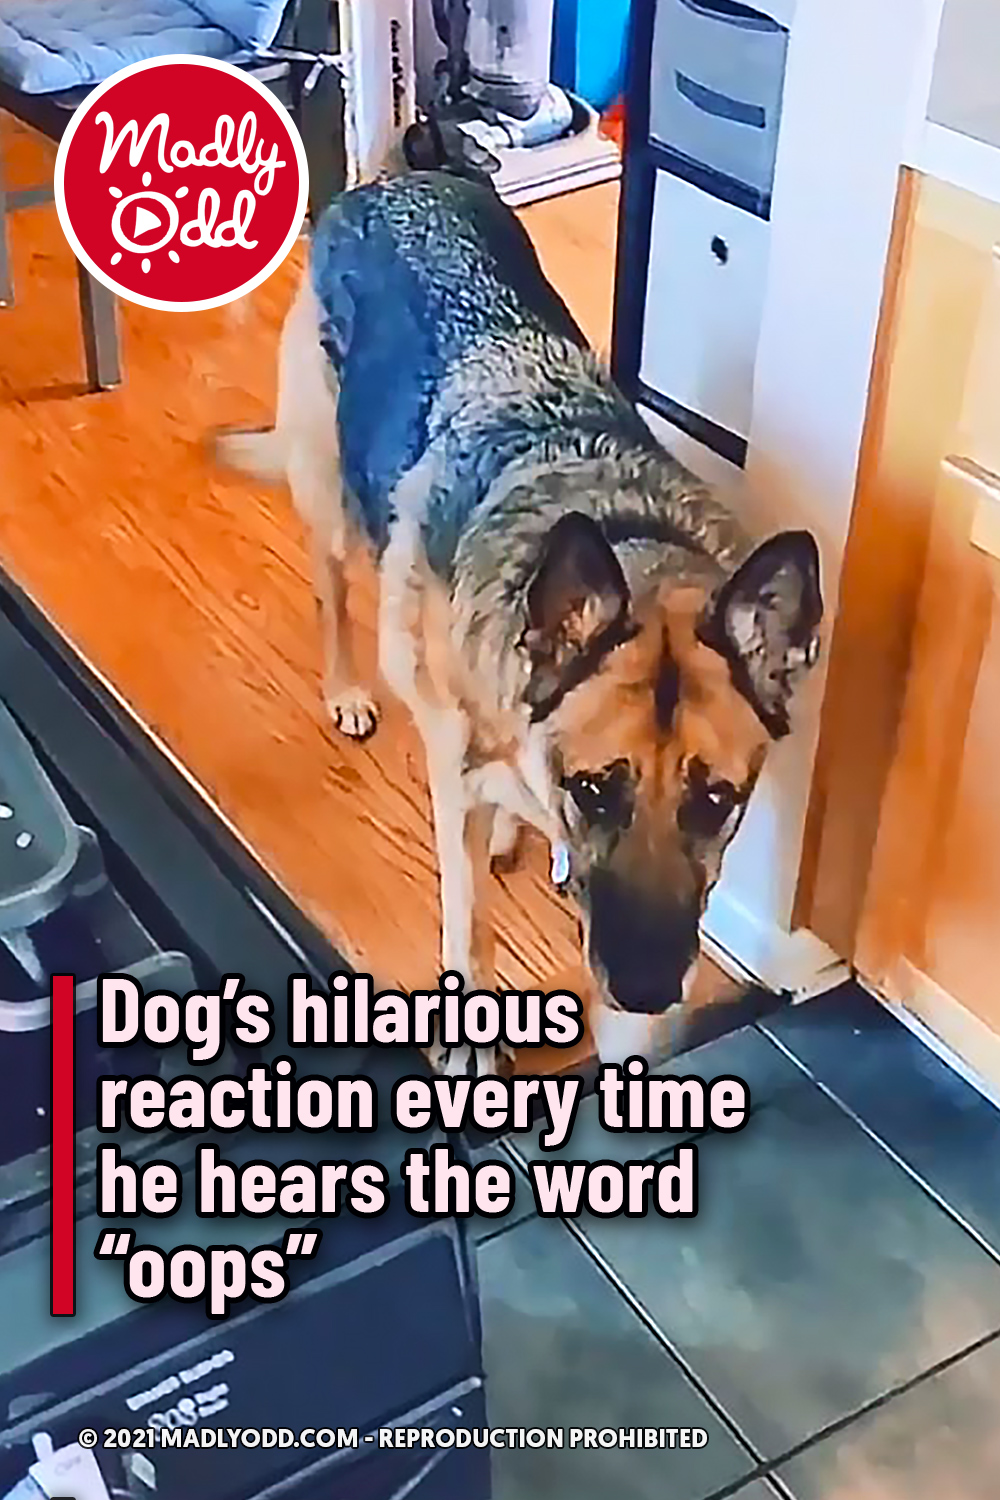 Dog’s hilarious reaction every time he hears the word “oops”